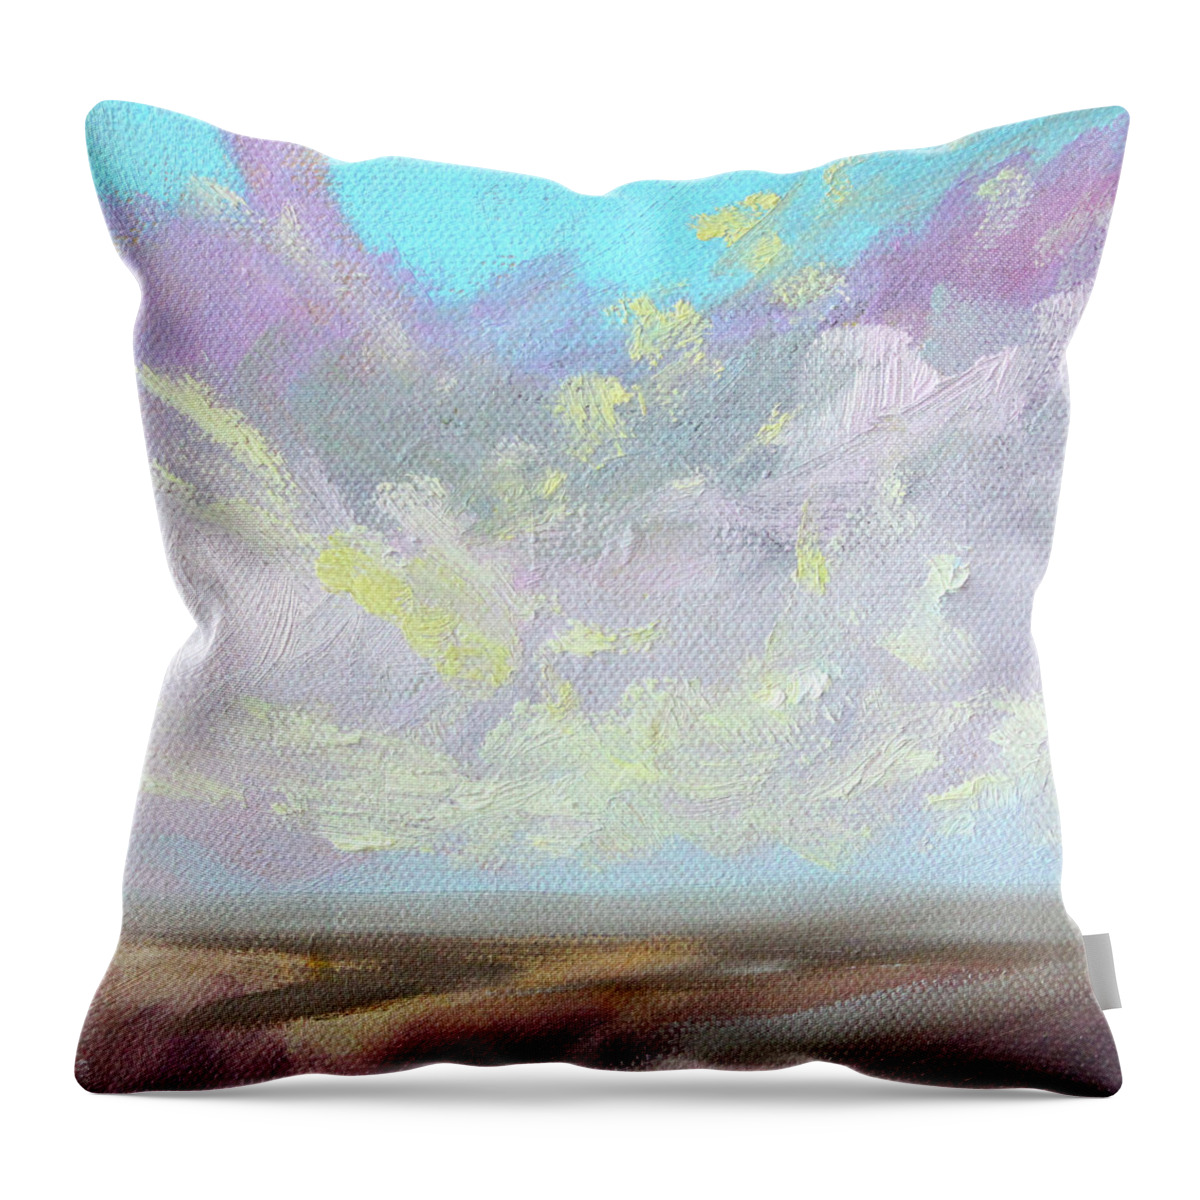 Colorful Clouds Throw Pillow featuring the painting Cloud Color by Nancy Merkle